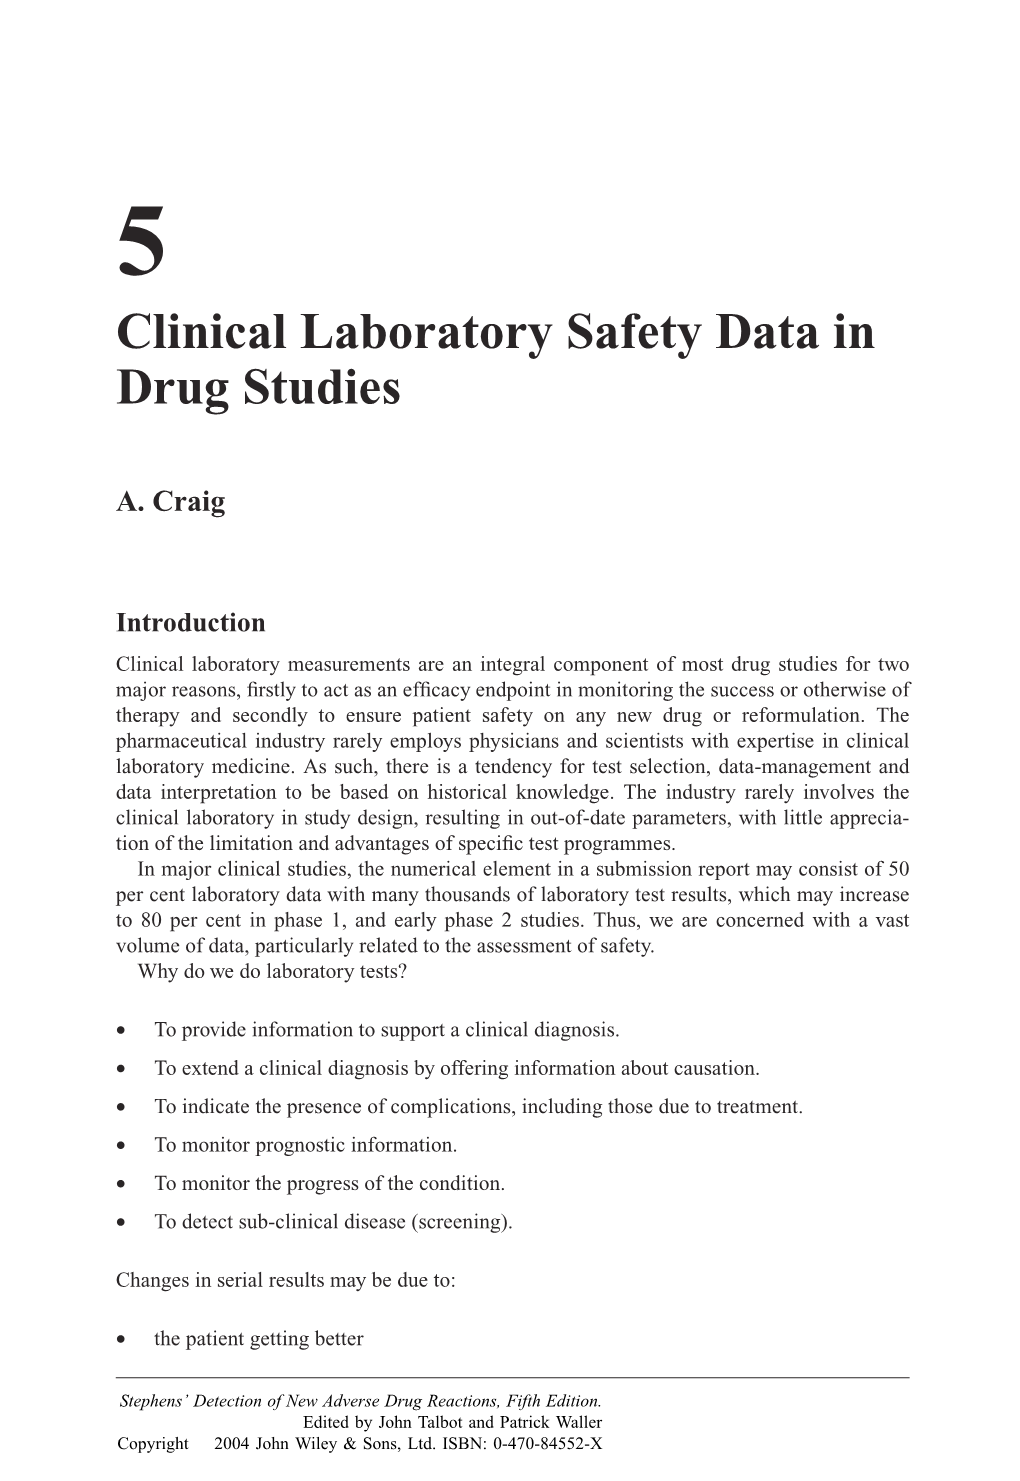 Clinical Laboratory Safety Data in Drug Studies